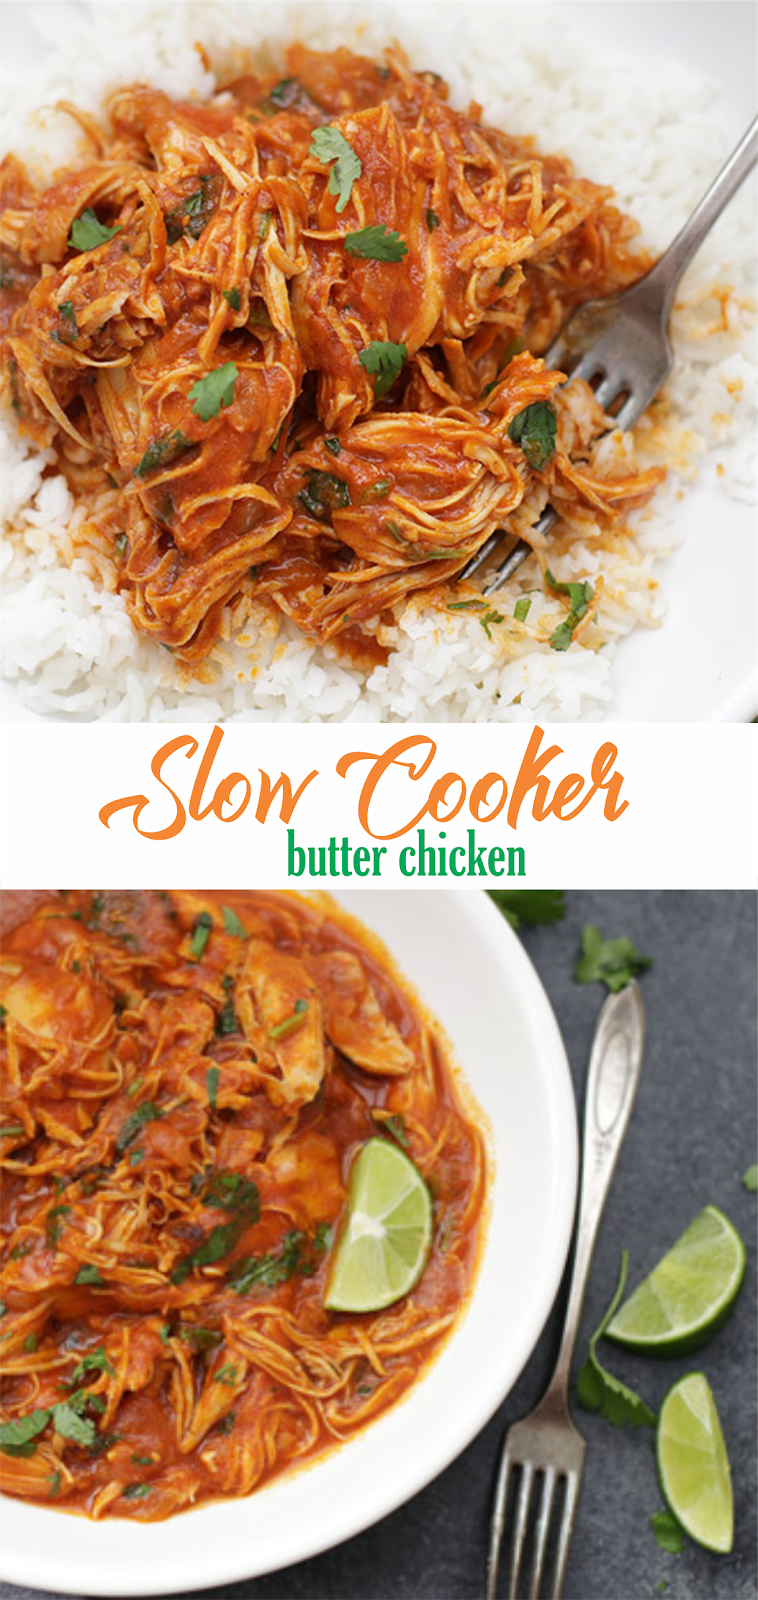 slow cooker butter chicken (gf, df, paleo, whole 30) | EAT